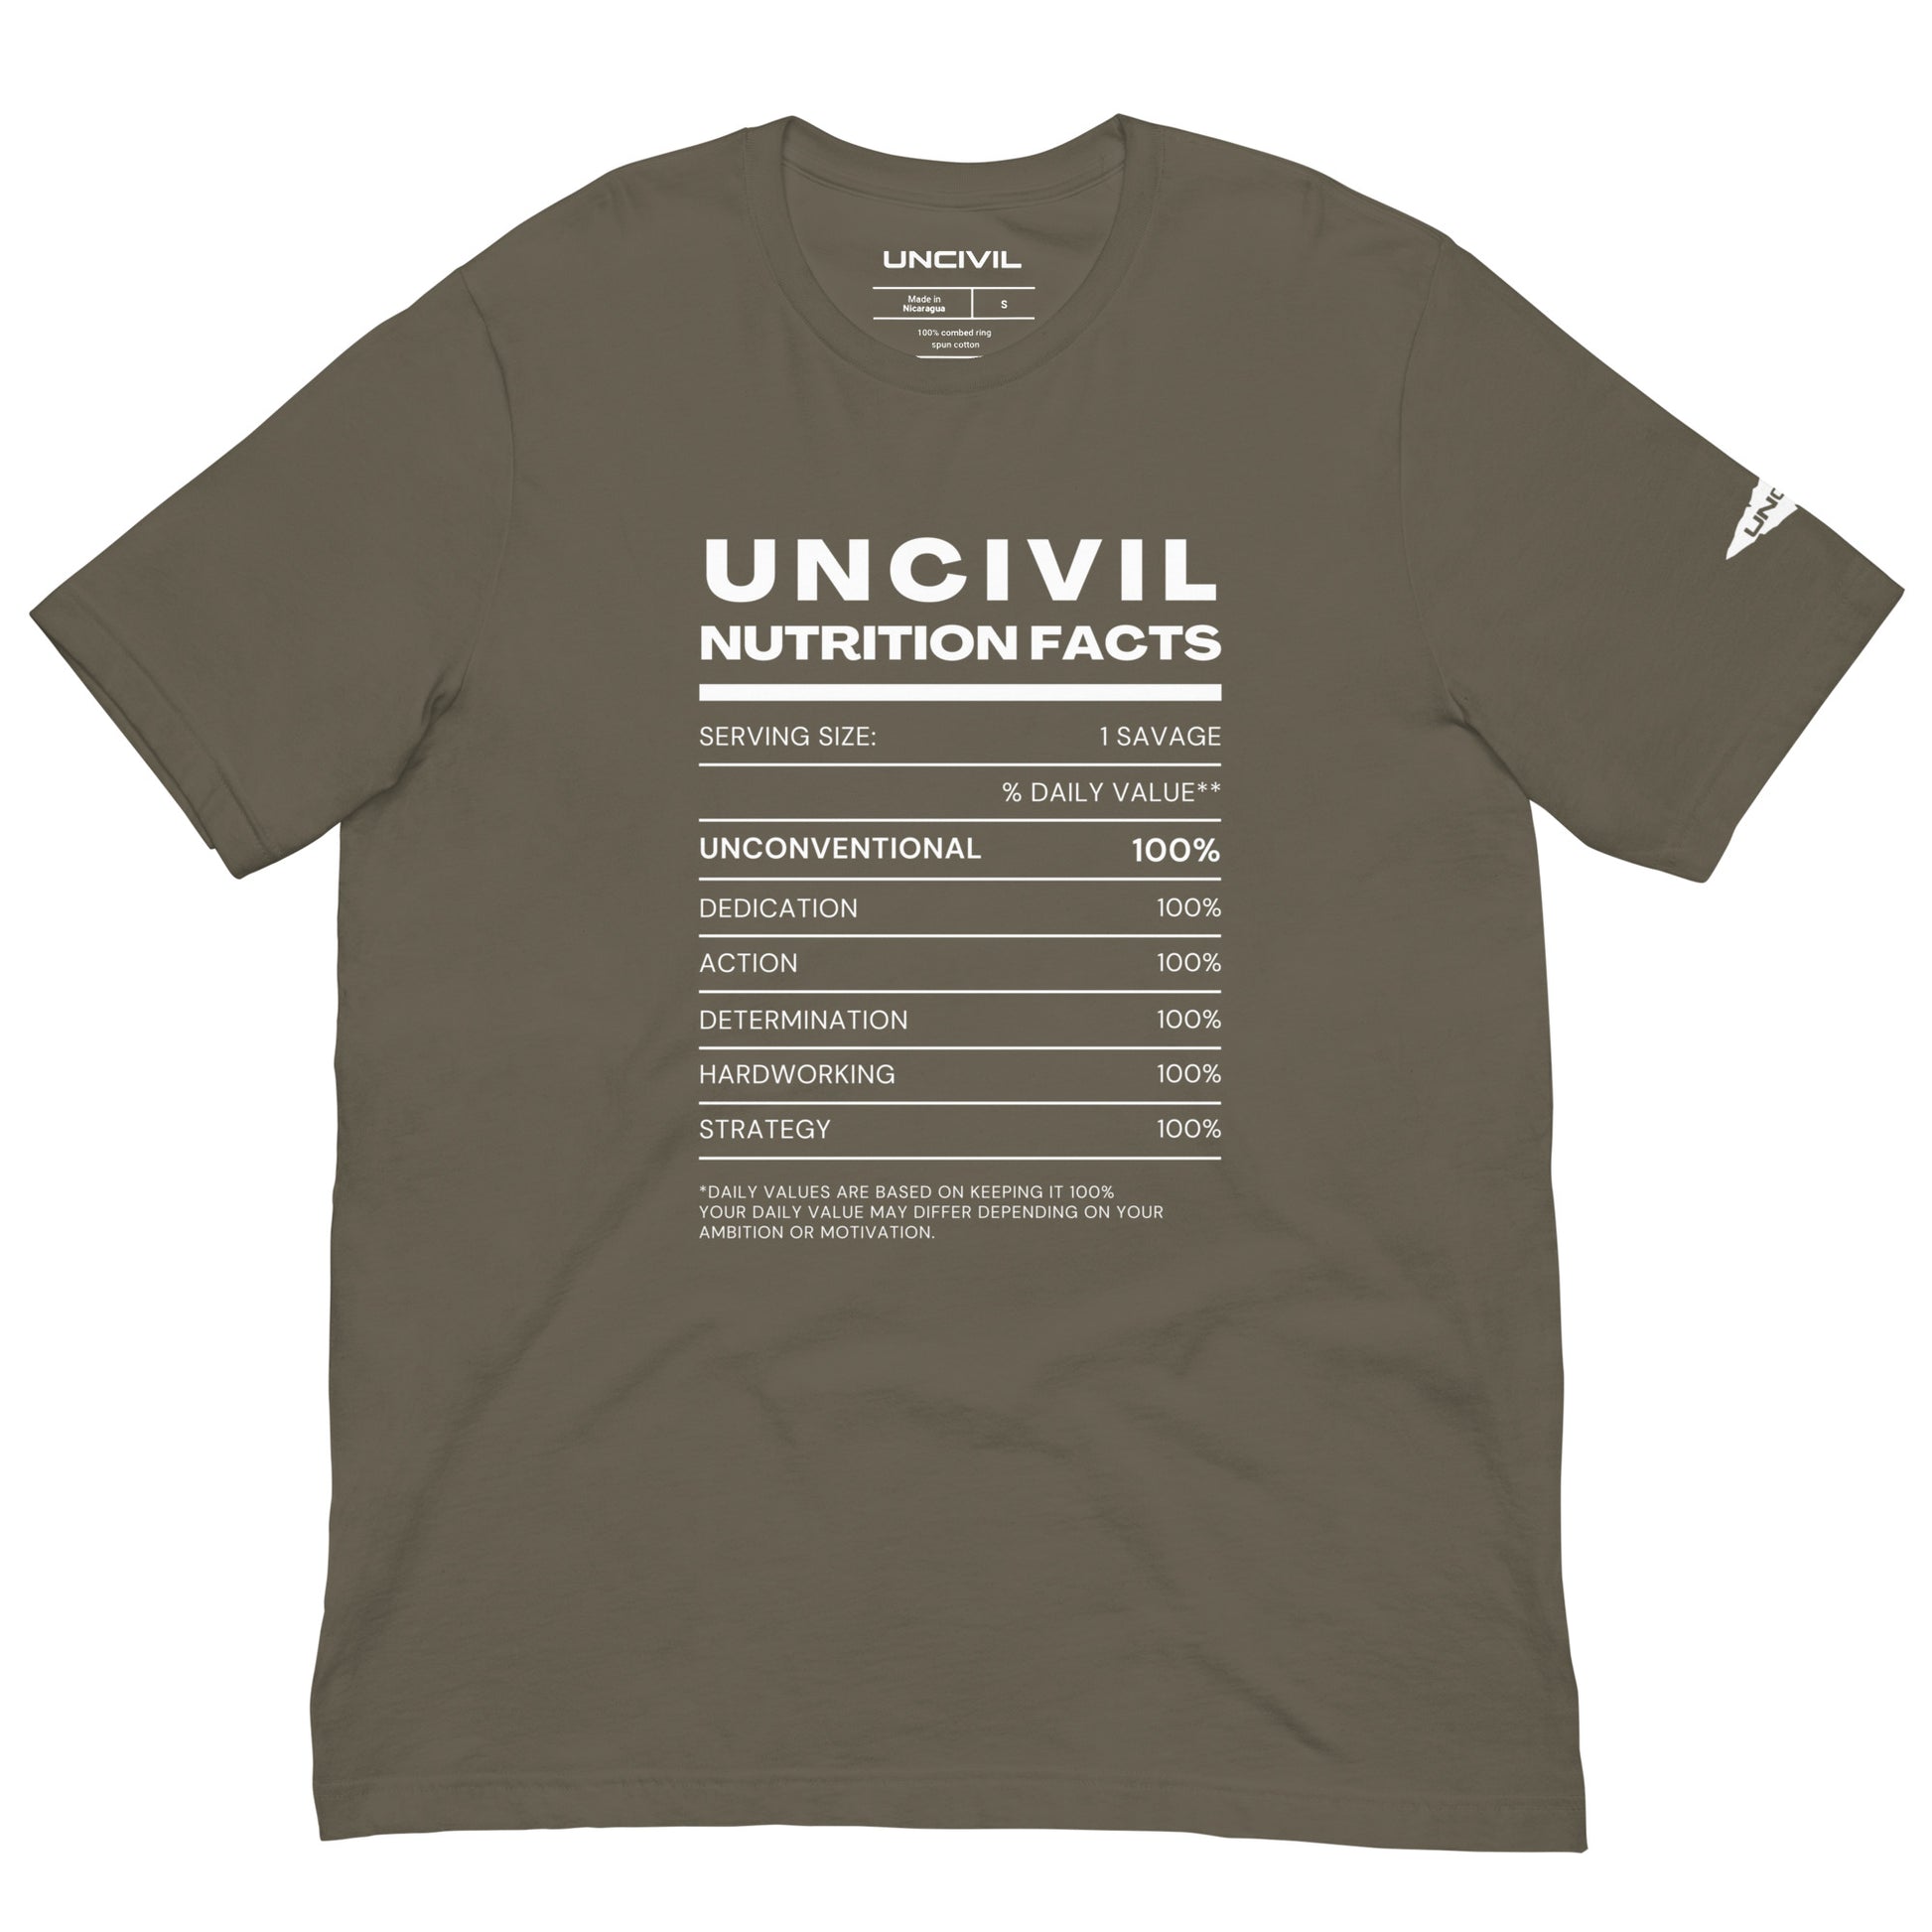 Our UNCIVIL Nutritional facts, Unconventional, dedicated, action, determination, hardworking, & strategy. Army Green unisex shirt.